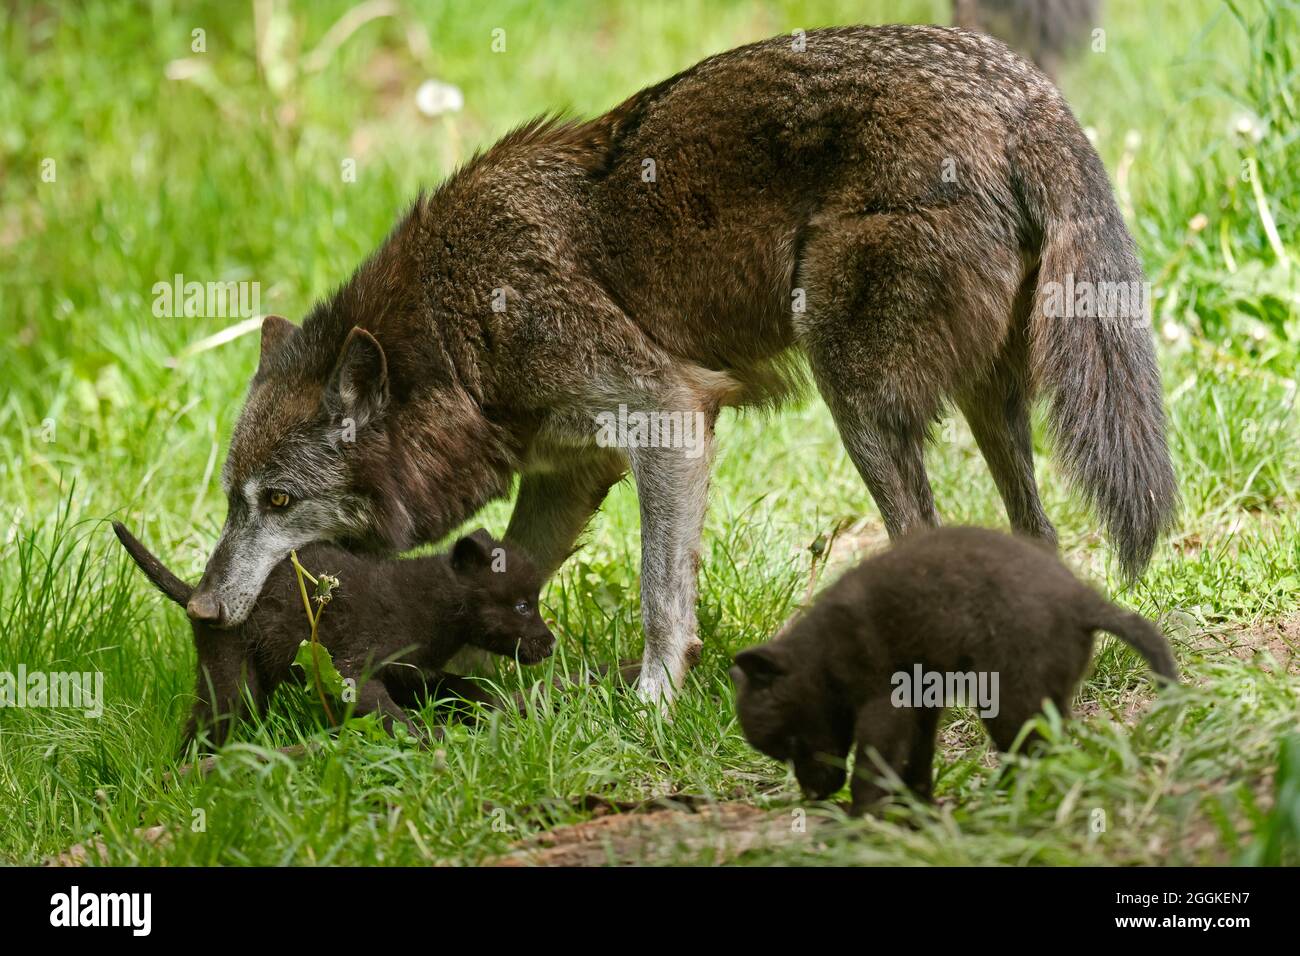 Timber wolf, American wolf (Canis lupus occidentalis), puppy with old animal at burrow, Germany Stock Photo